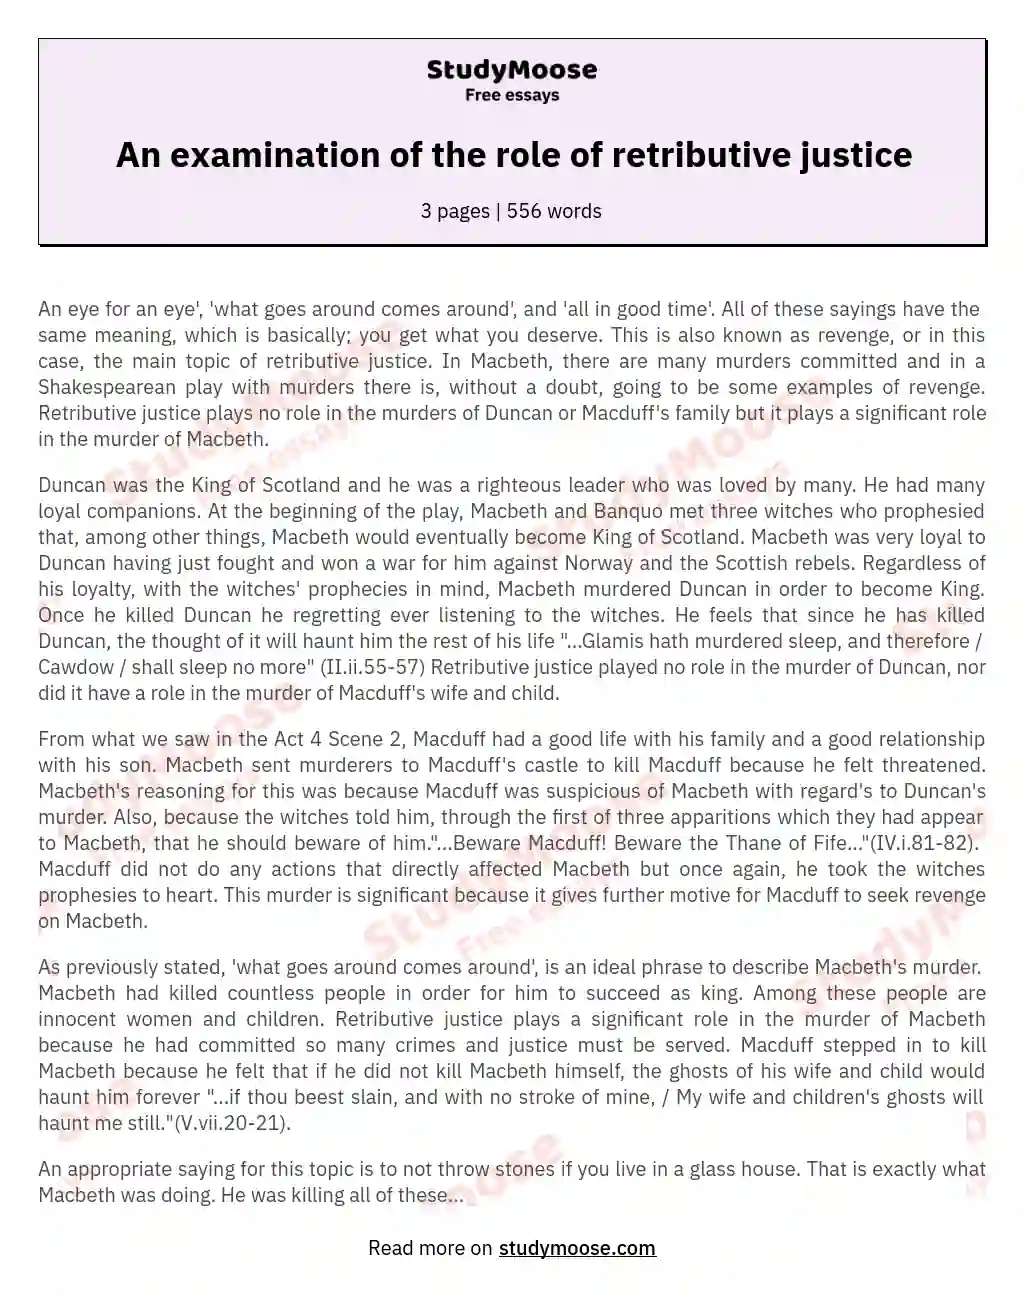 An examination of the role of retributive justice essay